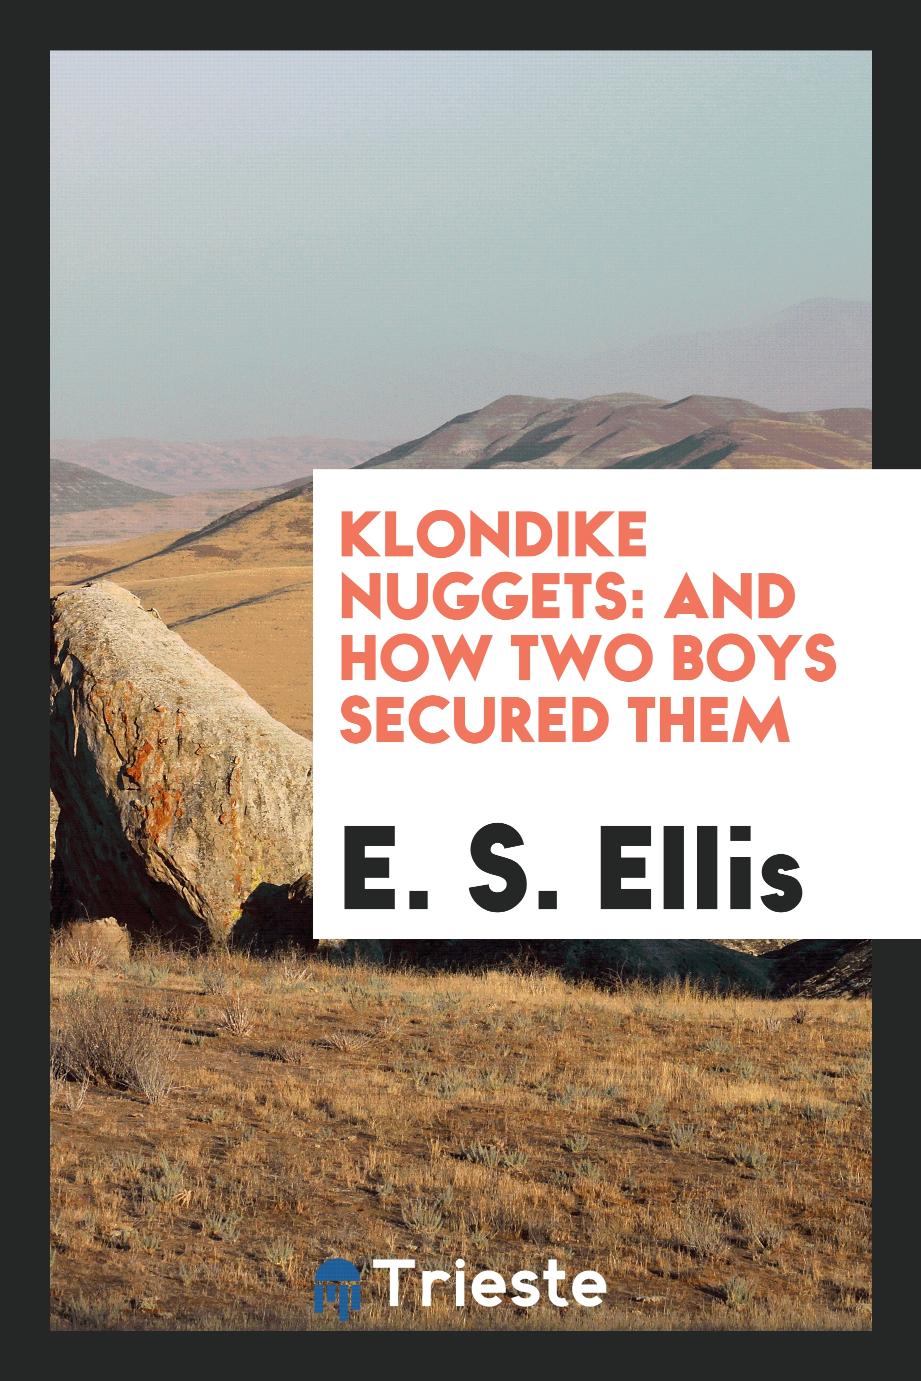 Klondike nuggets: and how two boys secured them